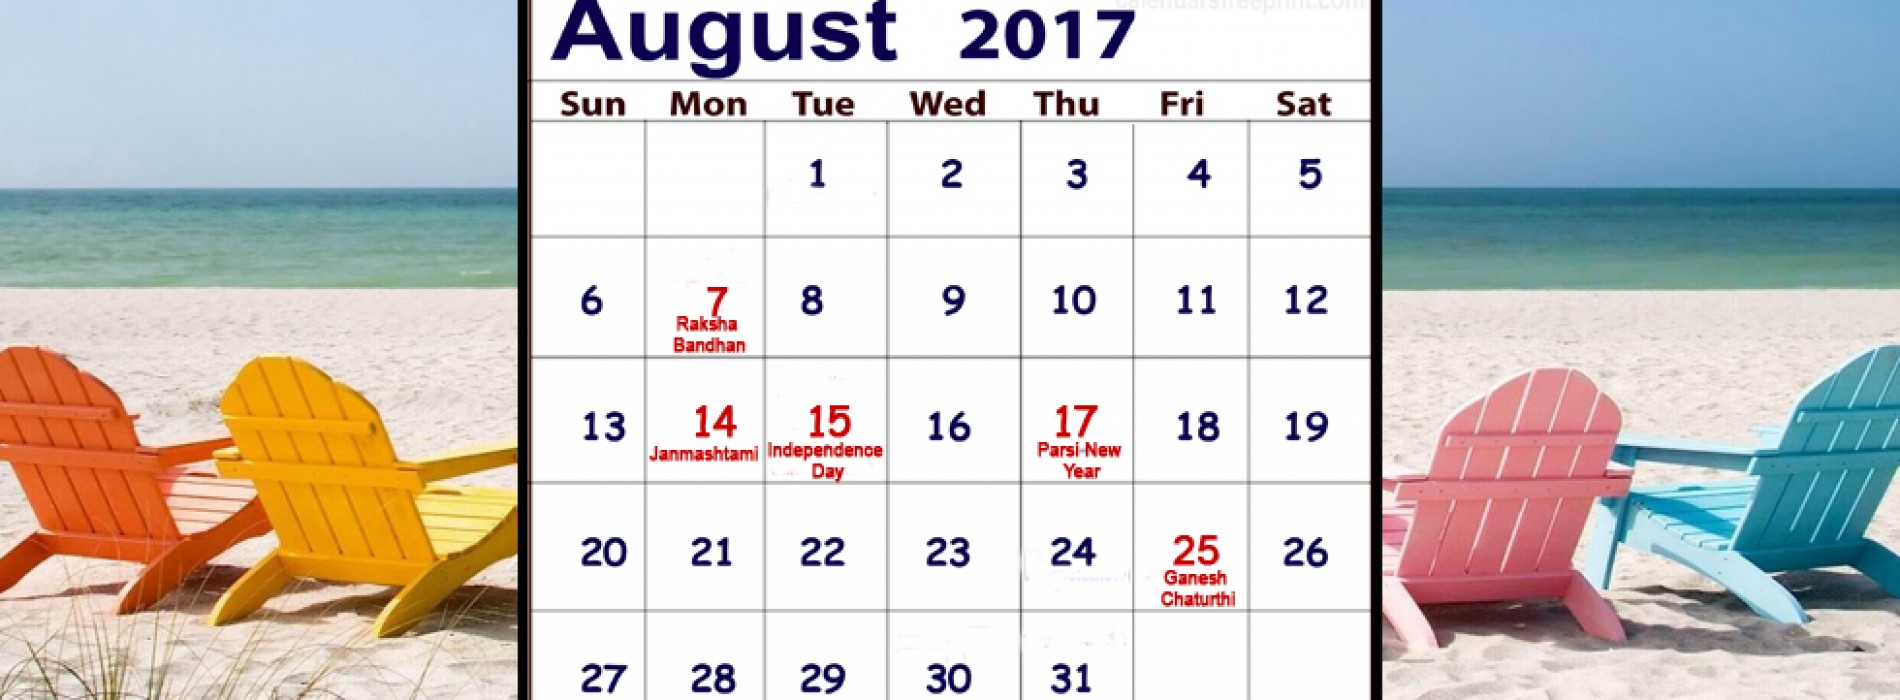 In August, enjoy one long weekend after another